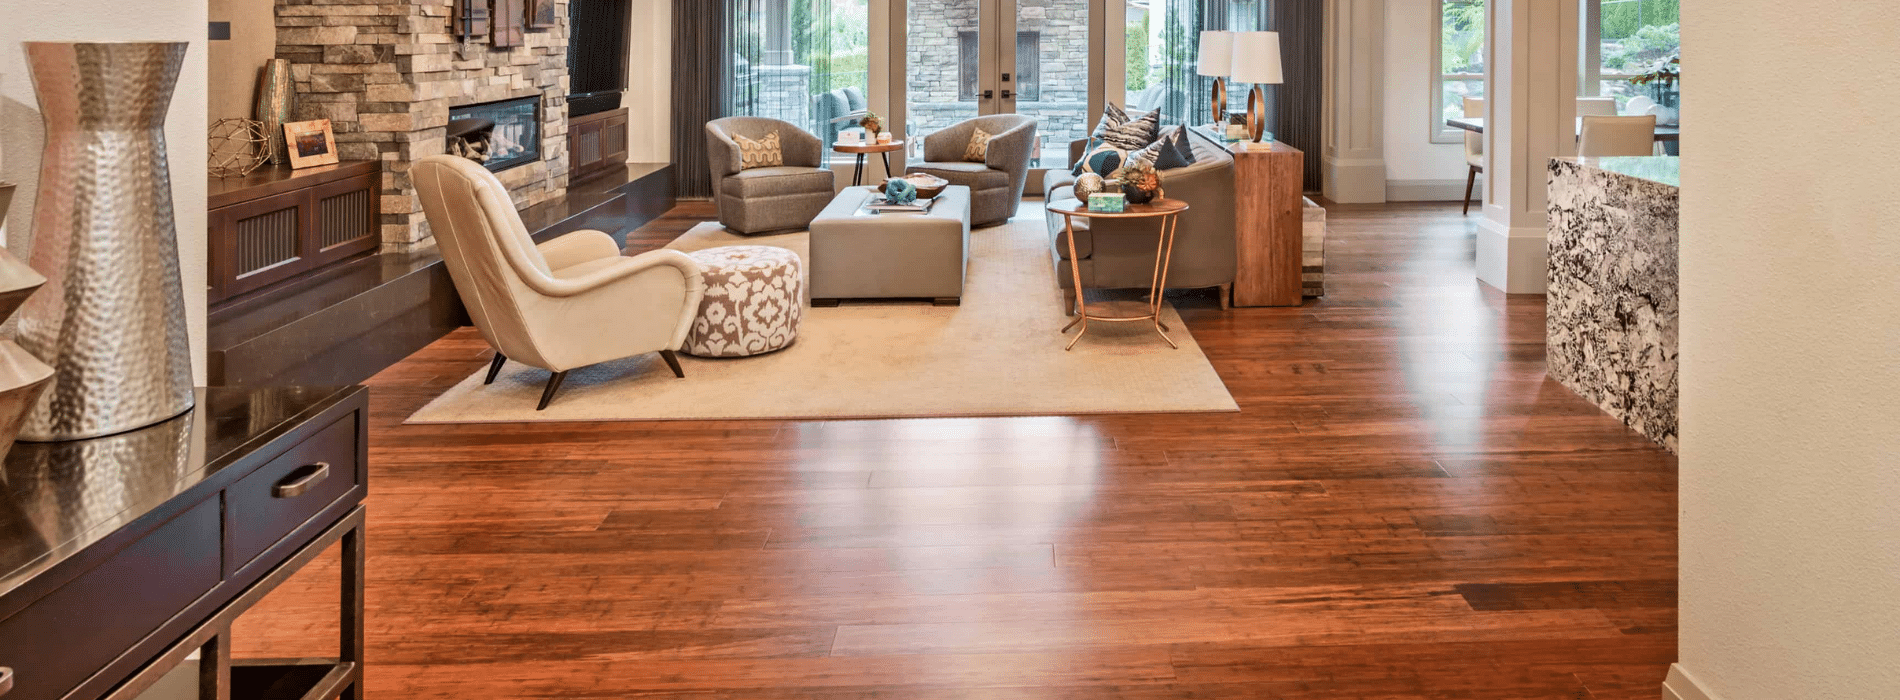 Remarkable restoration of 5-year-old engineered oak floors by Mr Sander® in Brentford, TW8. Meticulous care unveils their natural beauty. Warmth and allure enhanced with mid-oak stain. Junckers Strong satin finish adds durability.